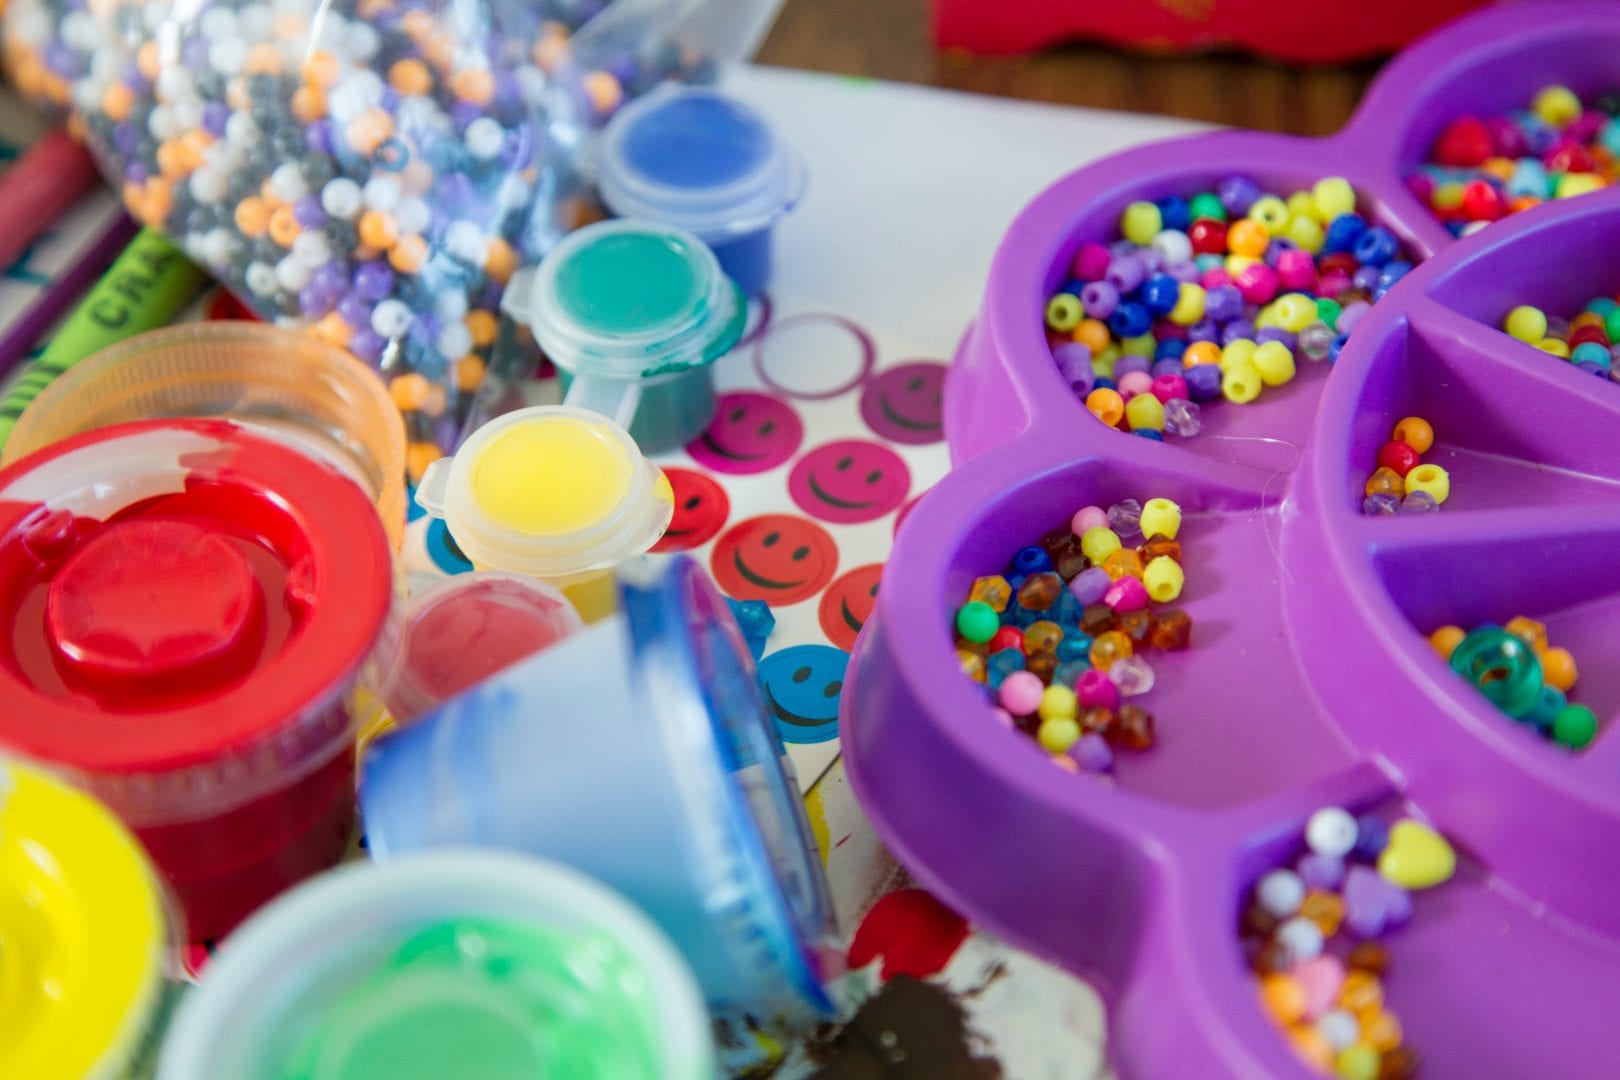 a variety of craft decorations including beads, paint, and stickers